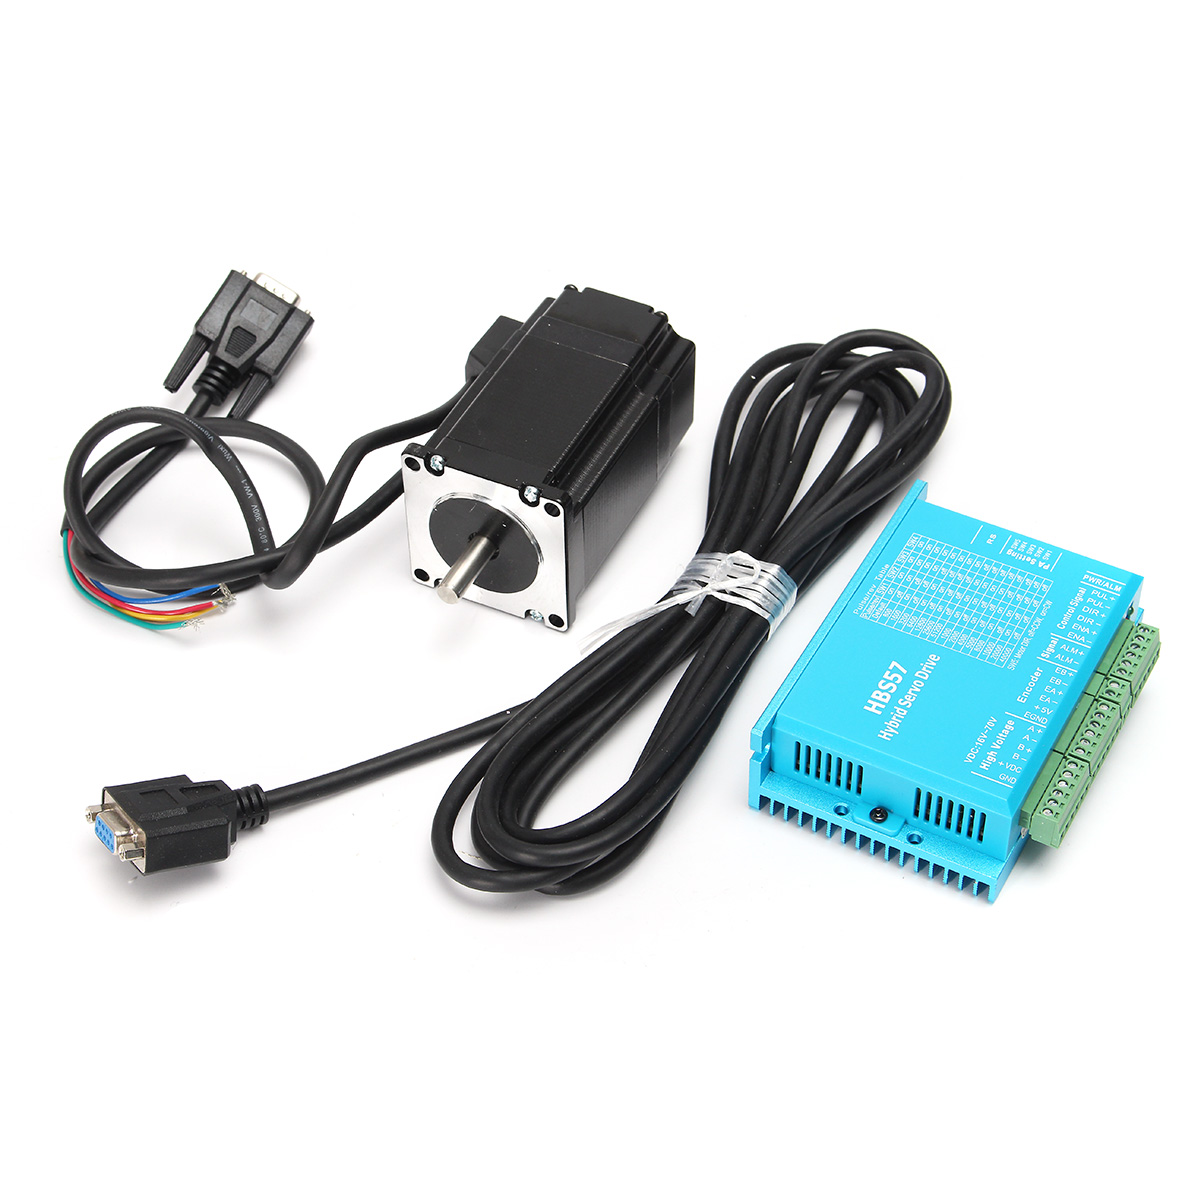 

High Speed Closed Loop Stepper Motor + HBS57 Stepper Driver + Coding Cable Kit